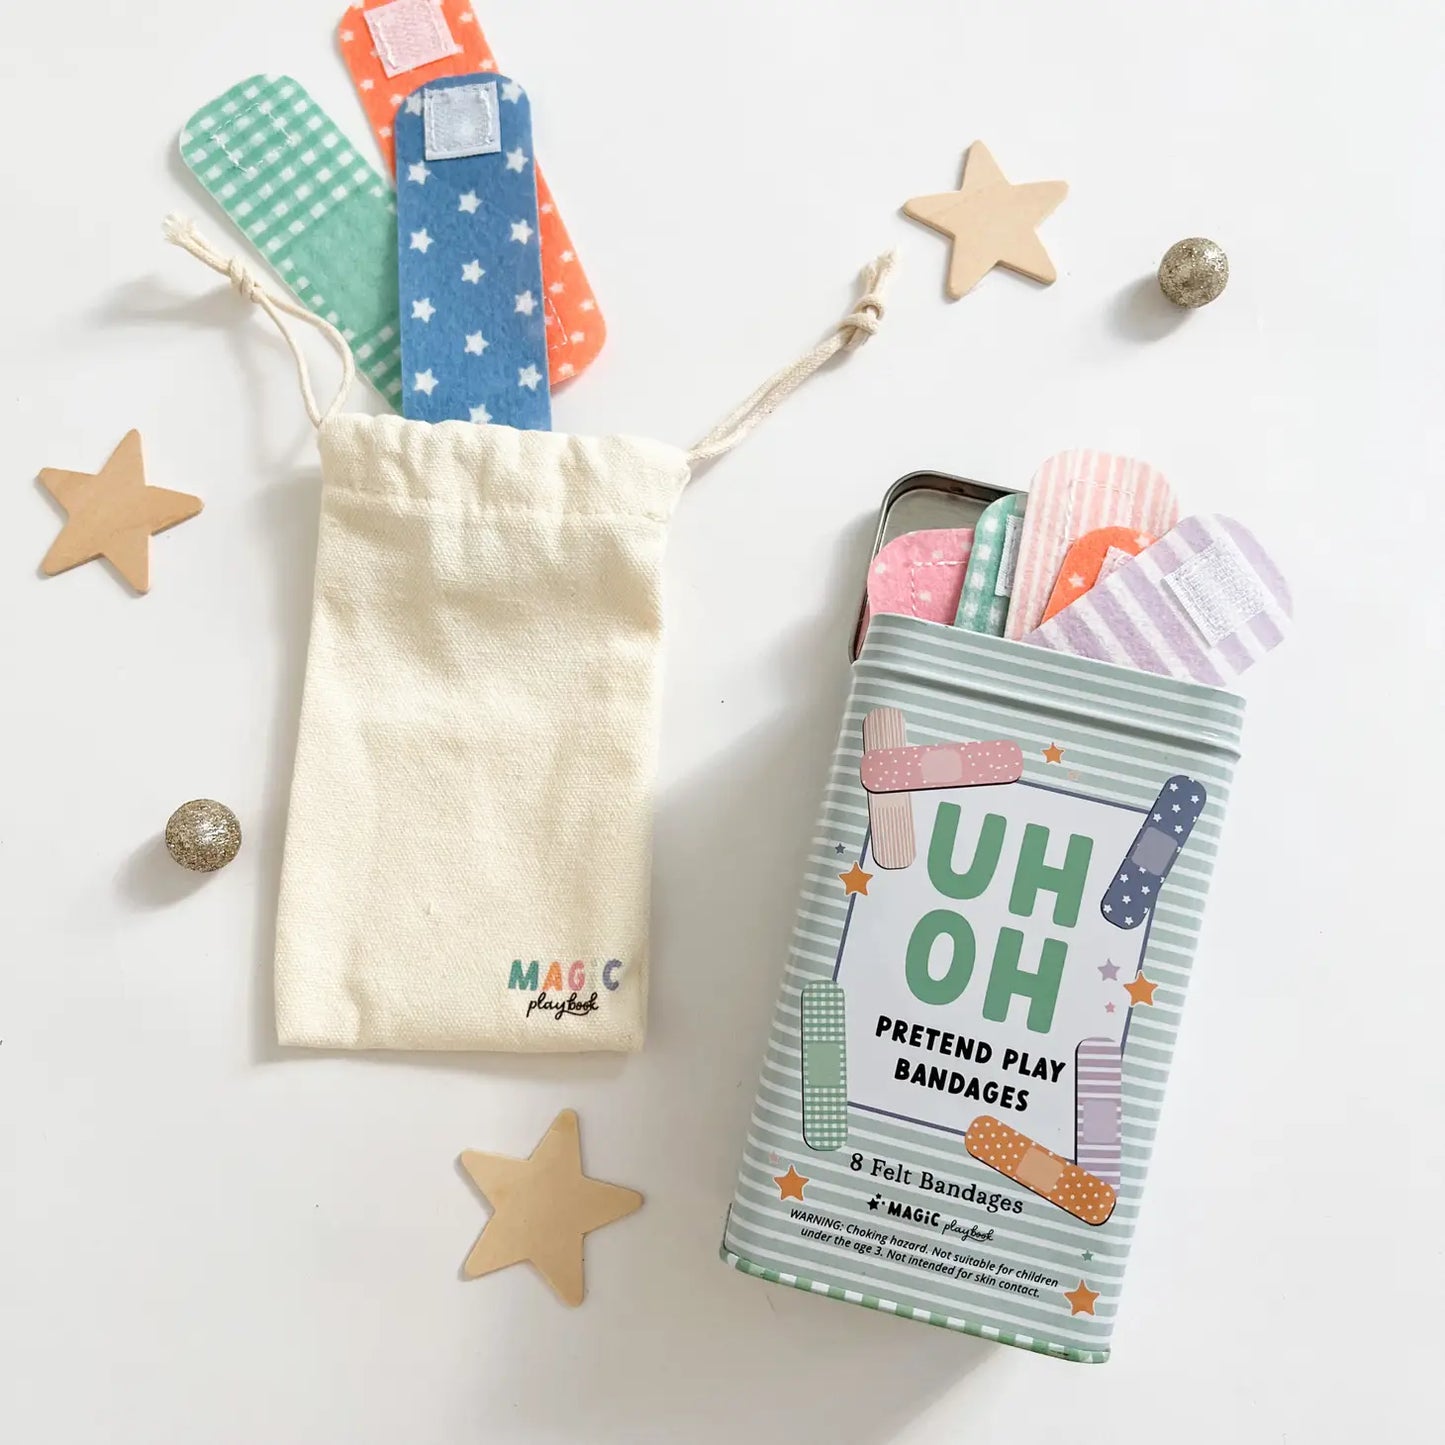 Pretend Play Bandages by Magic Playbook